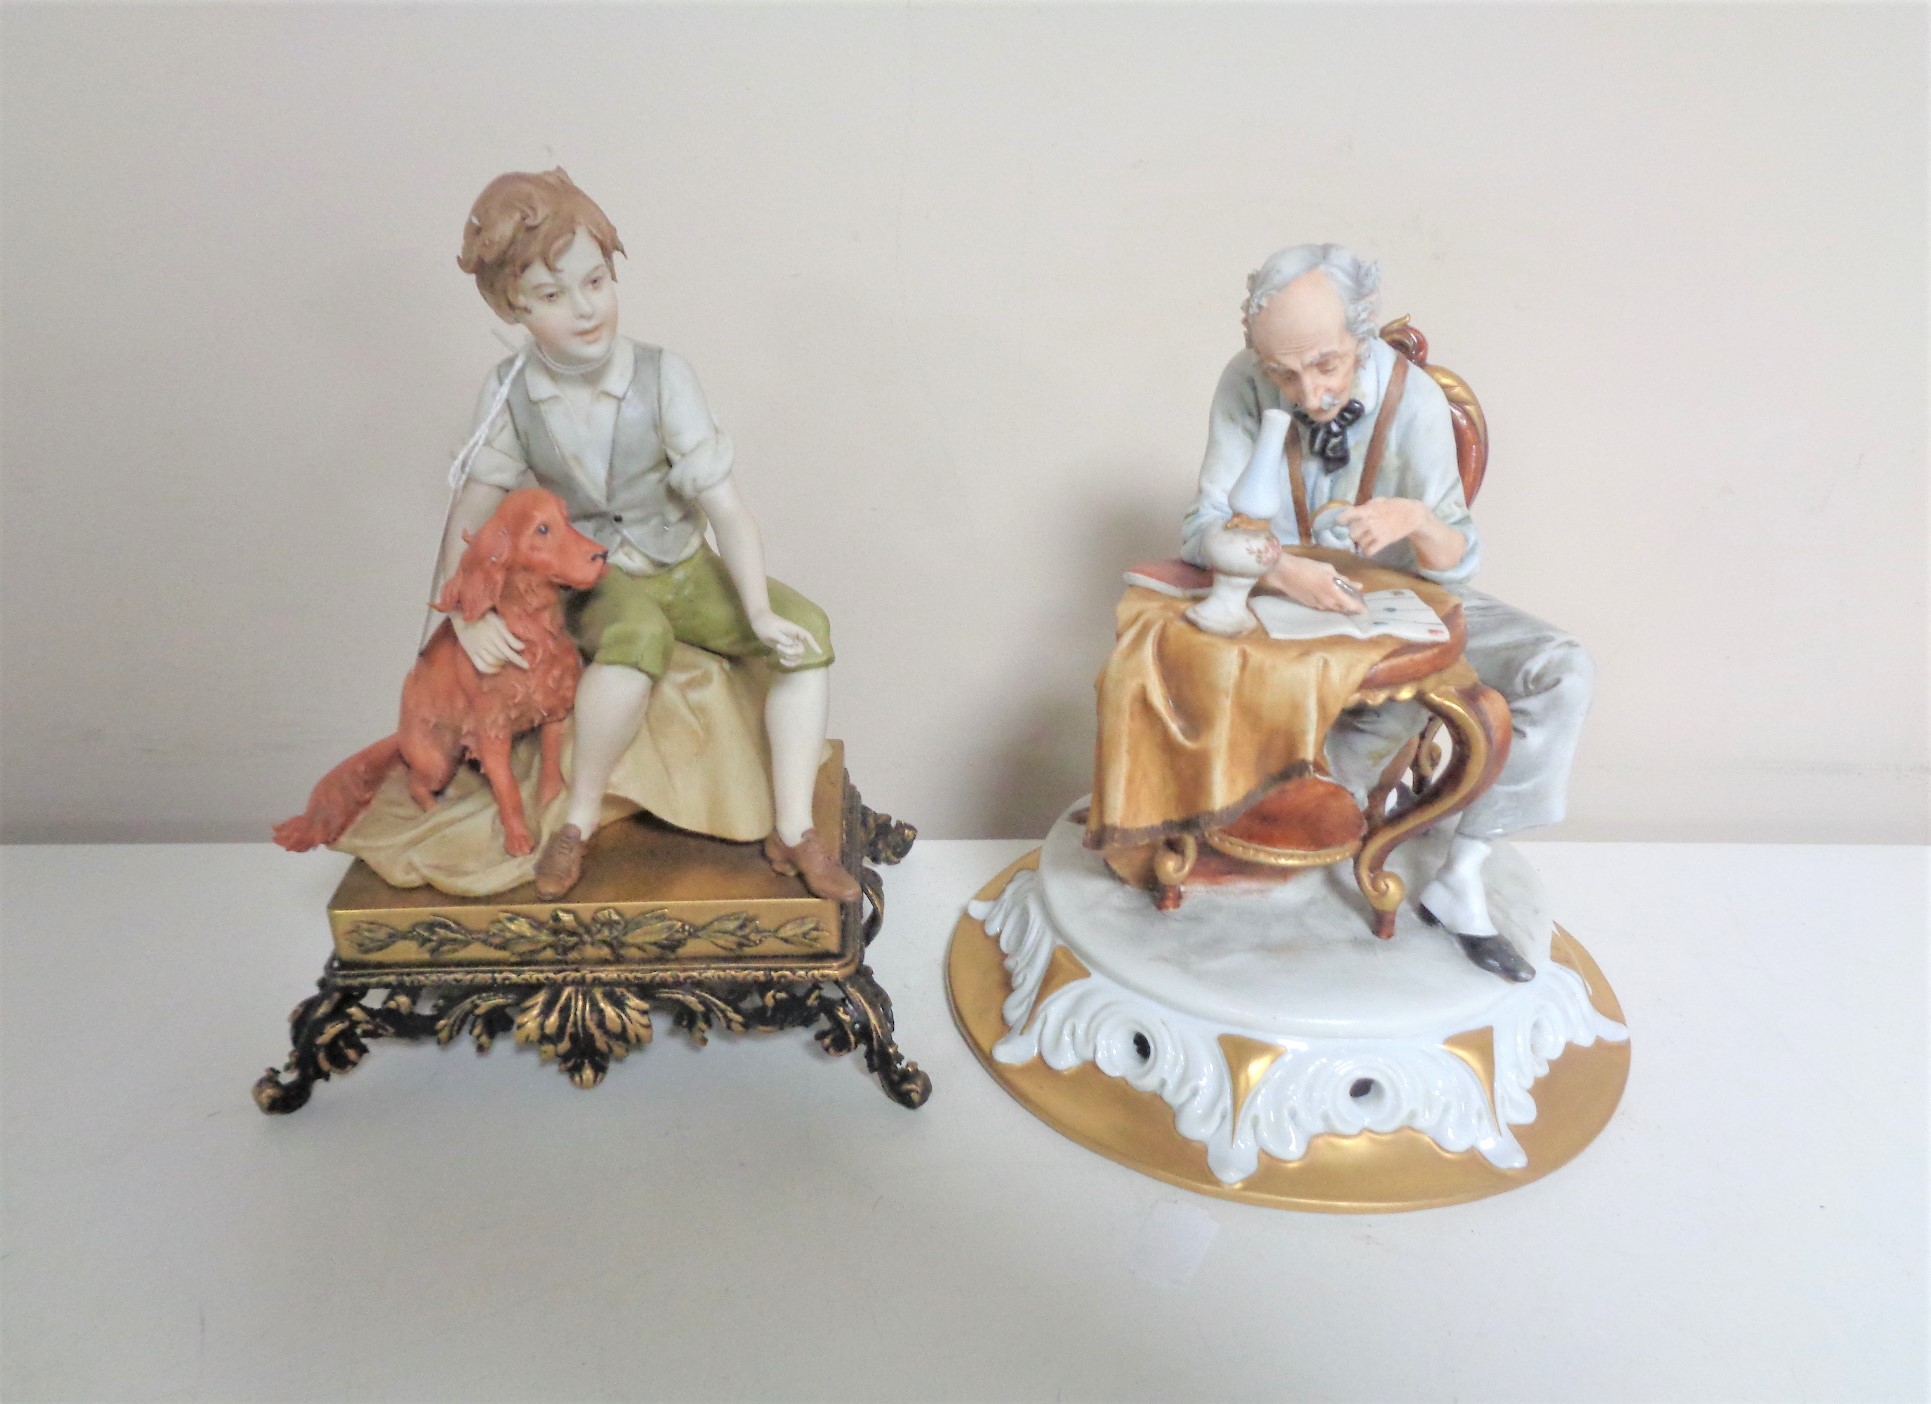 Two Italian Capodimonte figures - boy seated with red setter and man seated at table